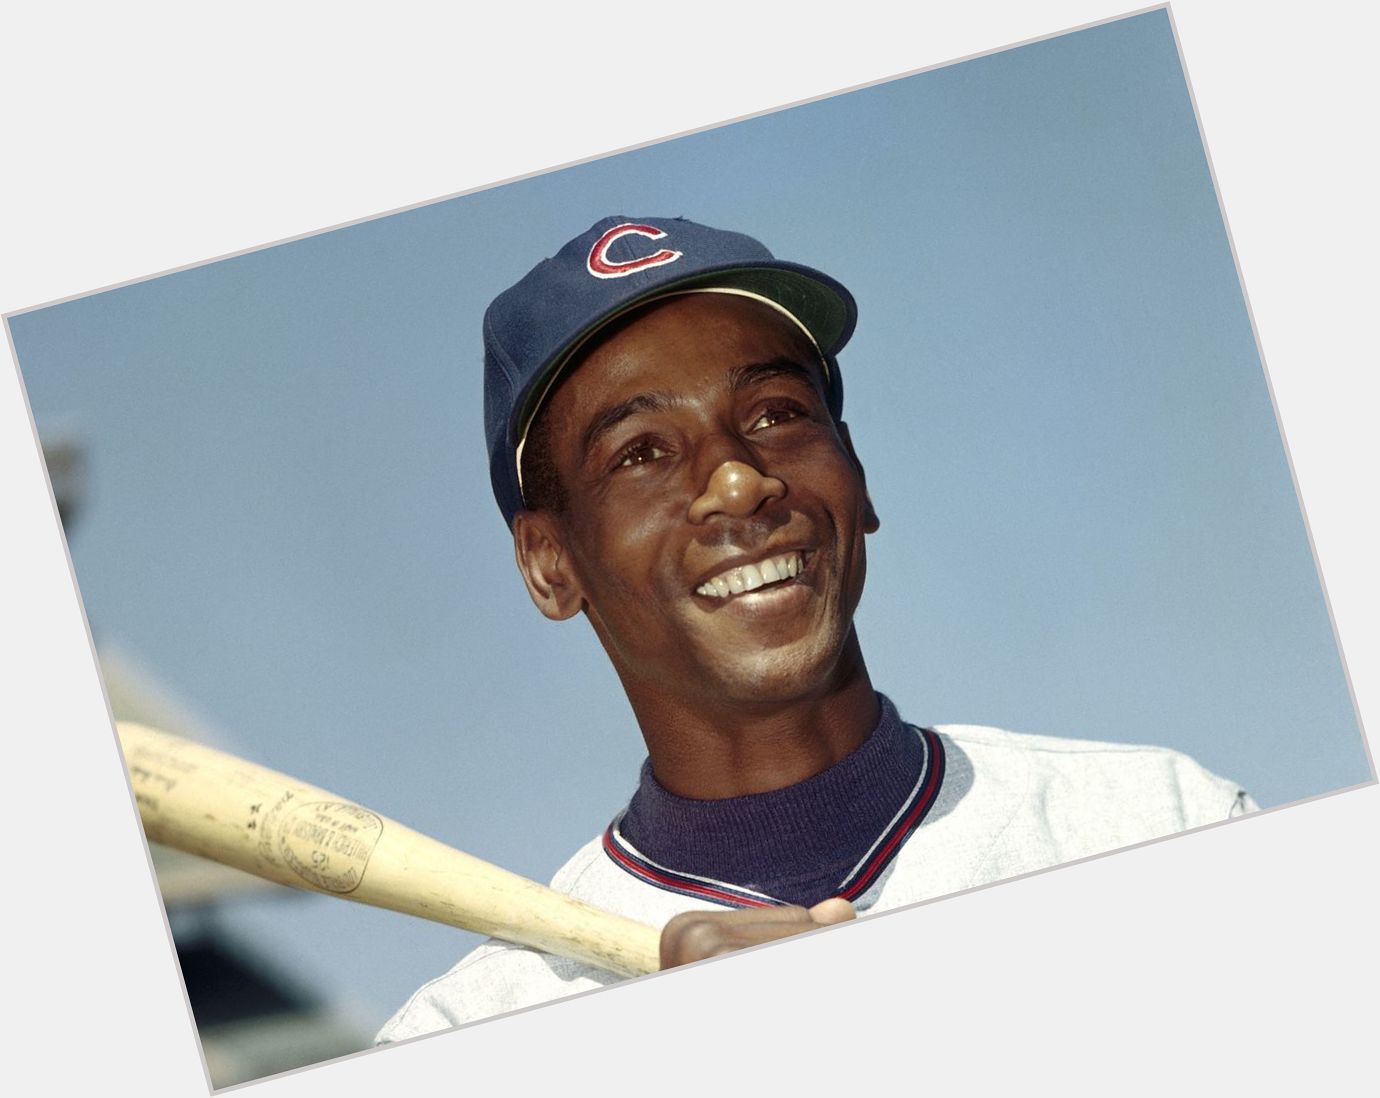 Ernie Banks would have turned 88 today. Happy birthday, Mr. Cub. 